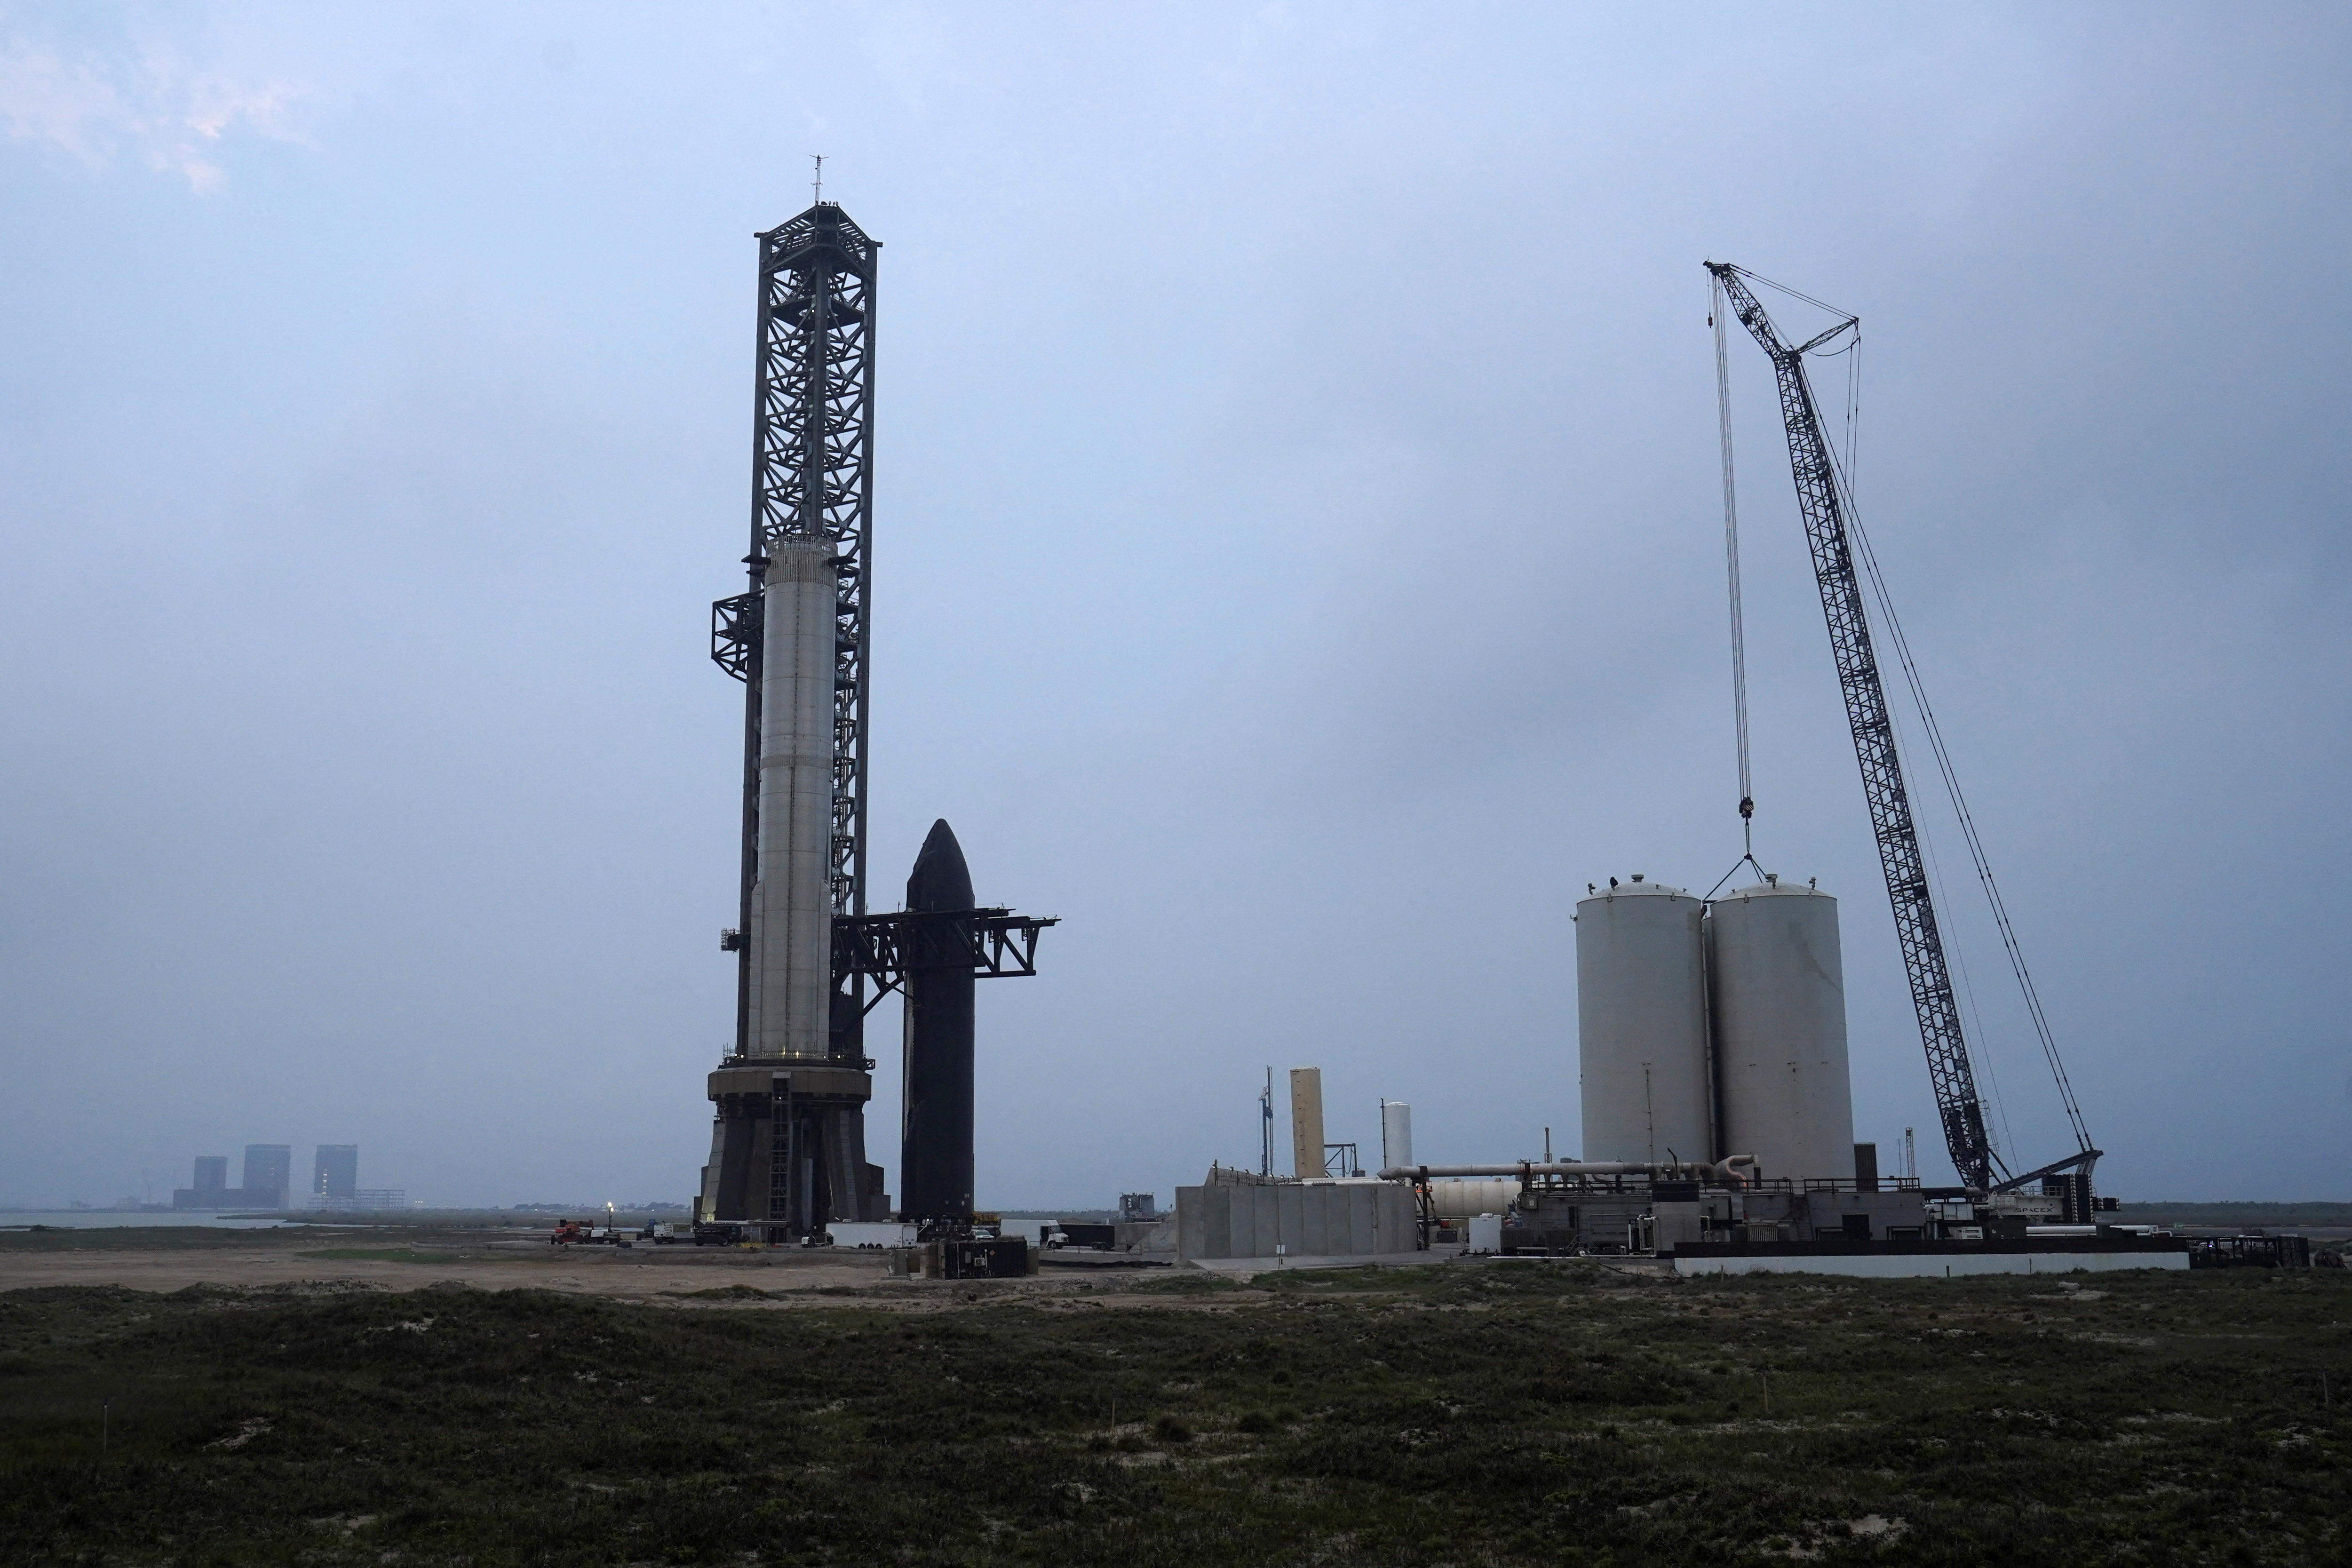 SpaceX’s Starship rocket prototype is pictured in the rocket launch area in Brownsville